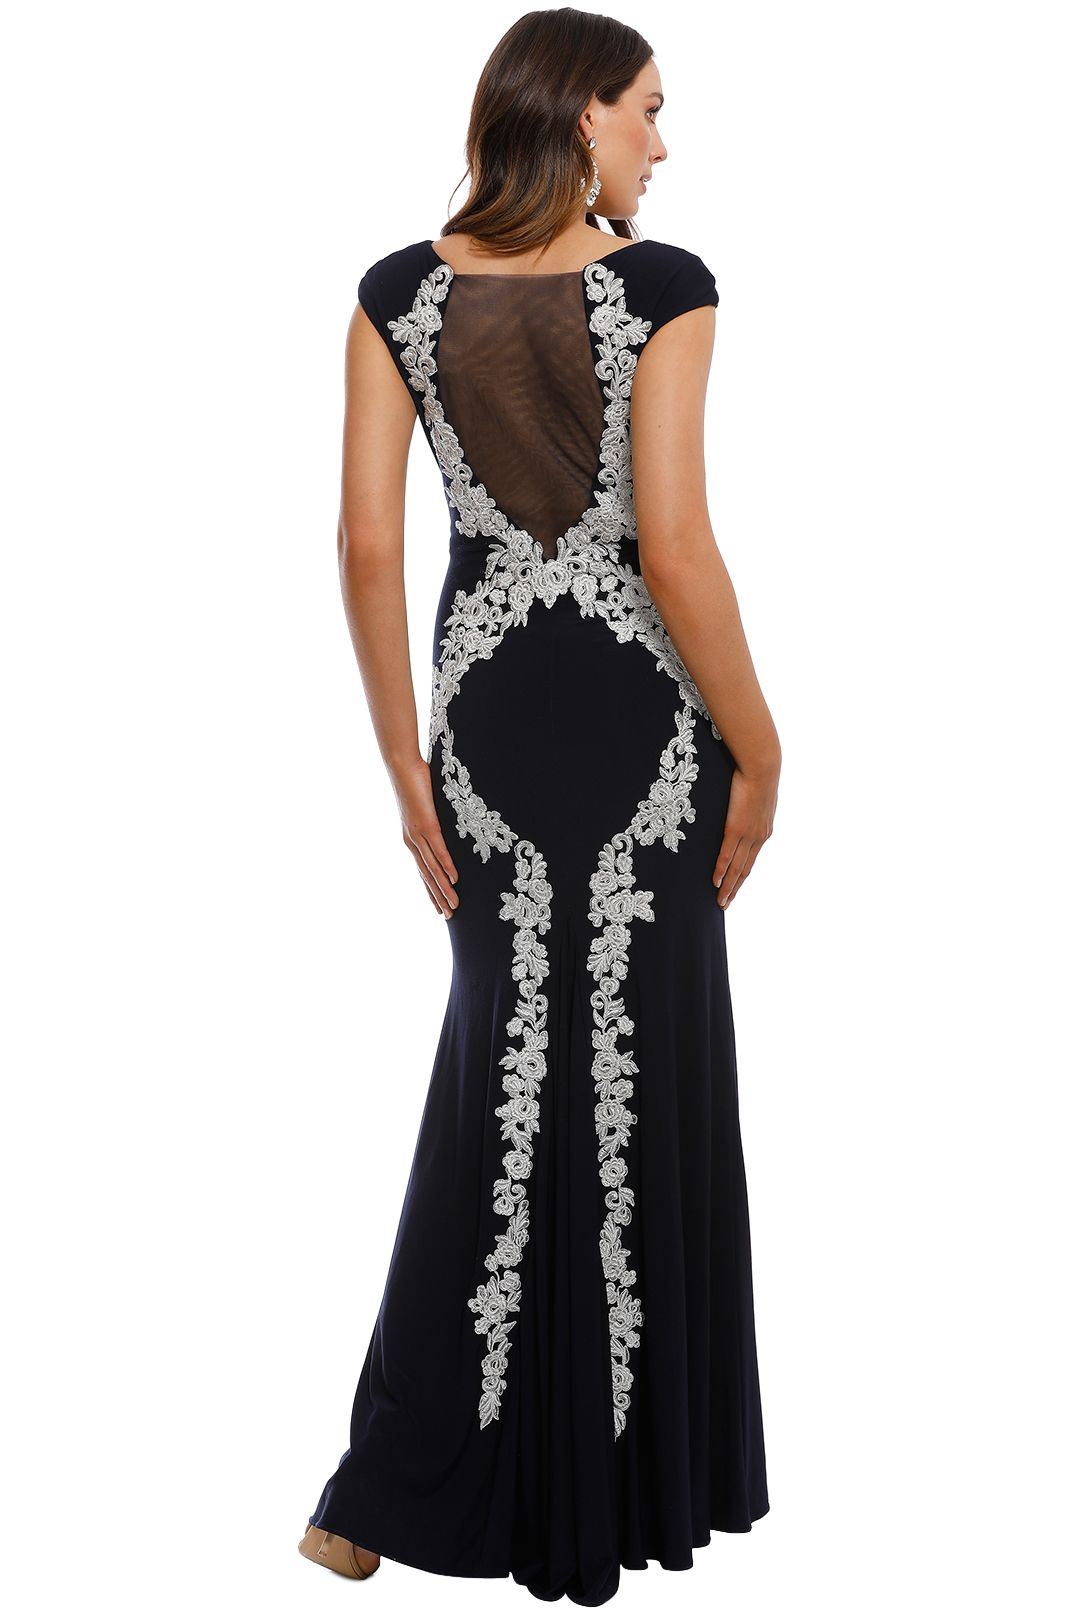 Montique - Ava Embroidered Gown - Navy - Back